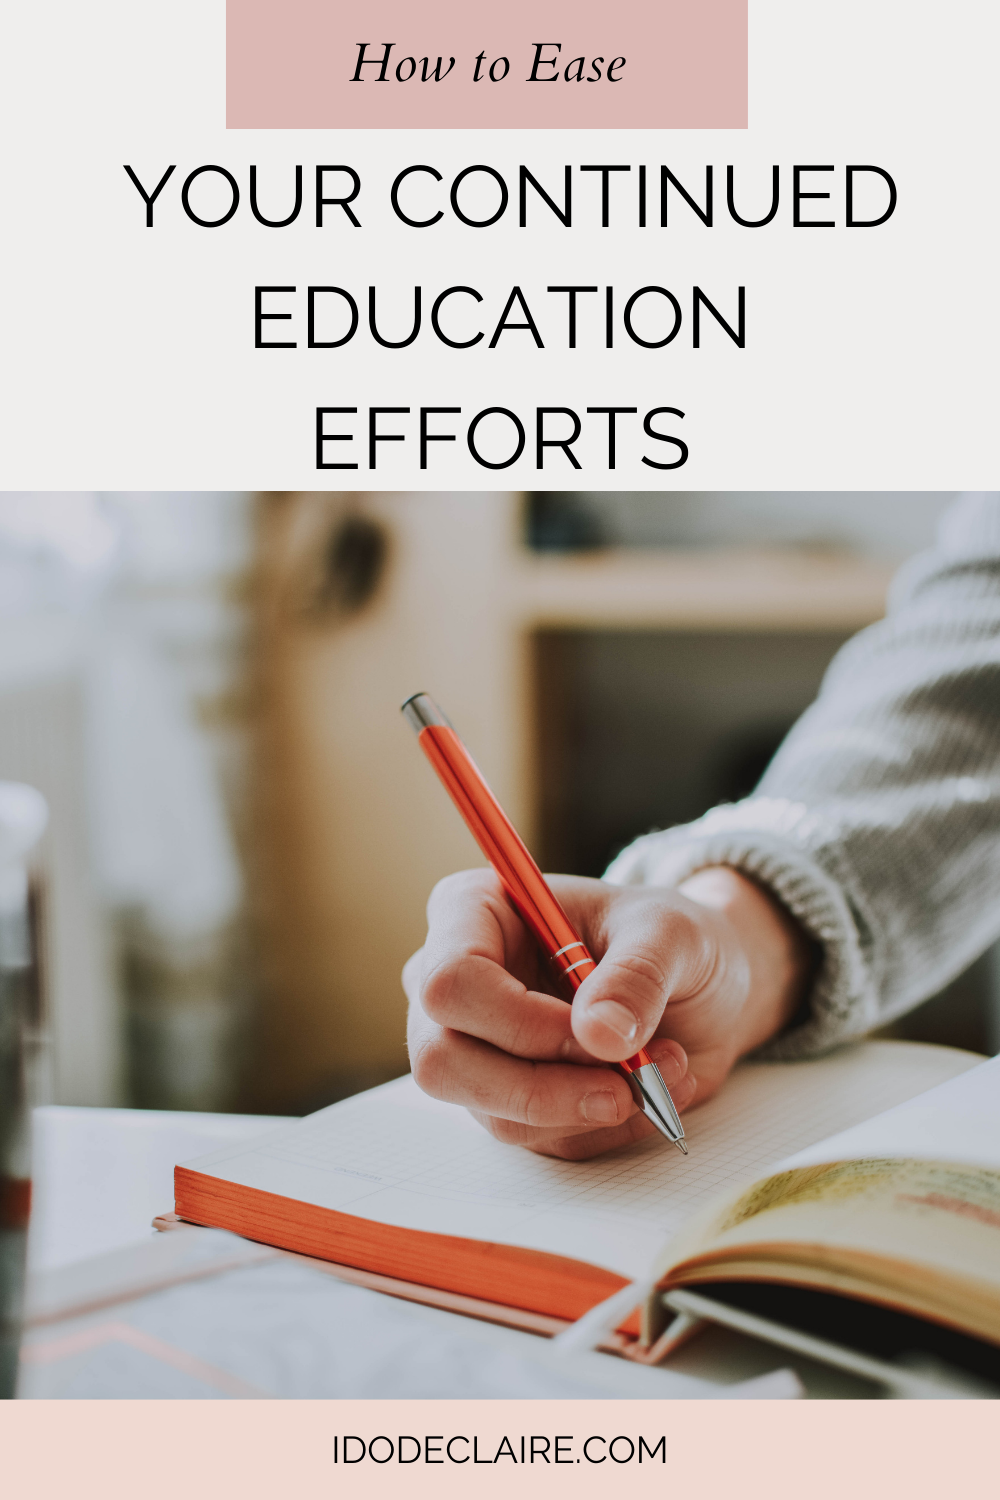 How to Ease Your Continued Education Efforts